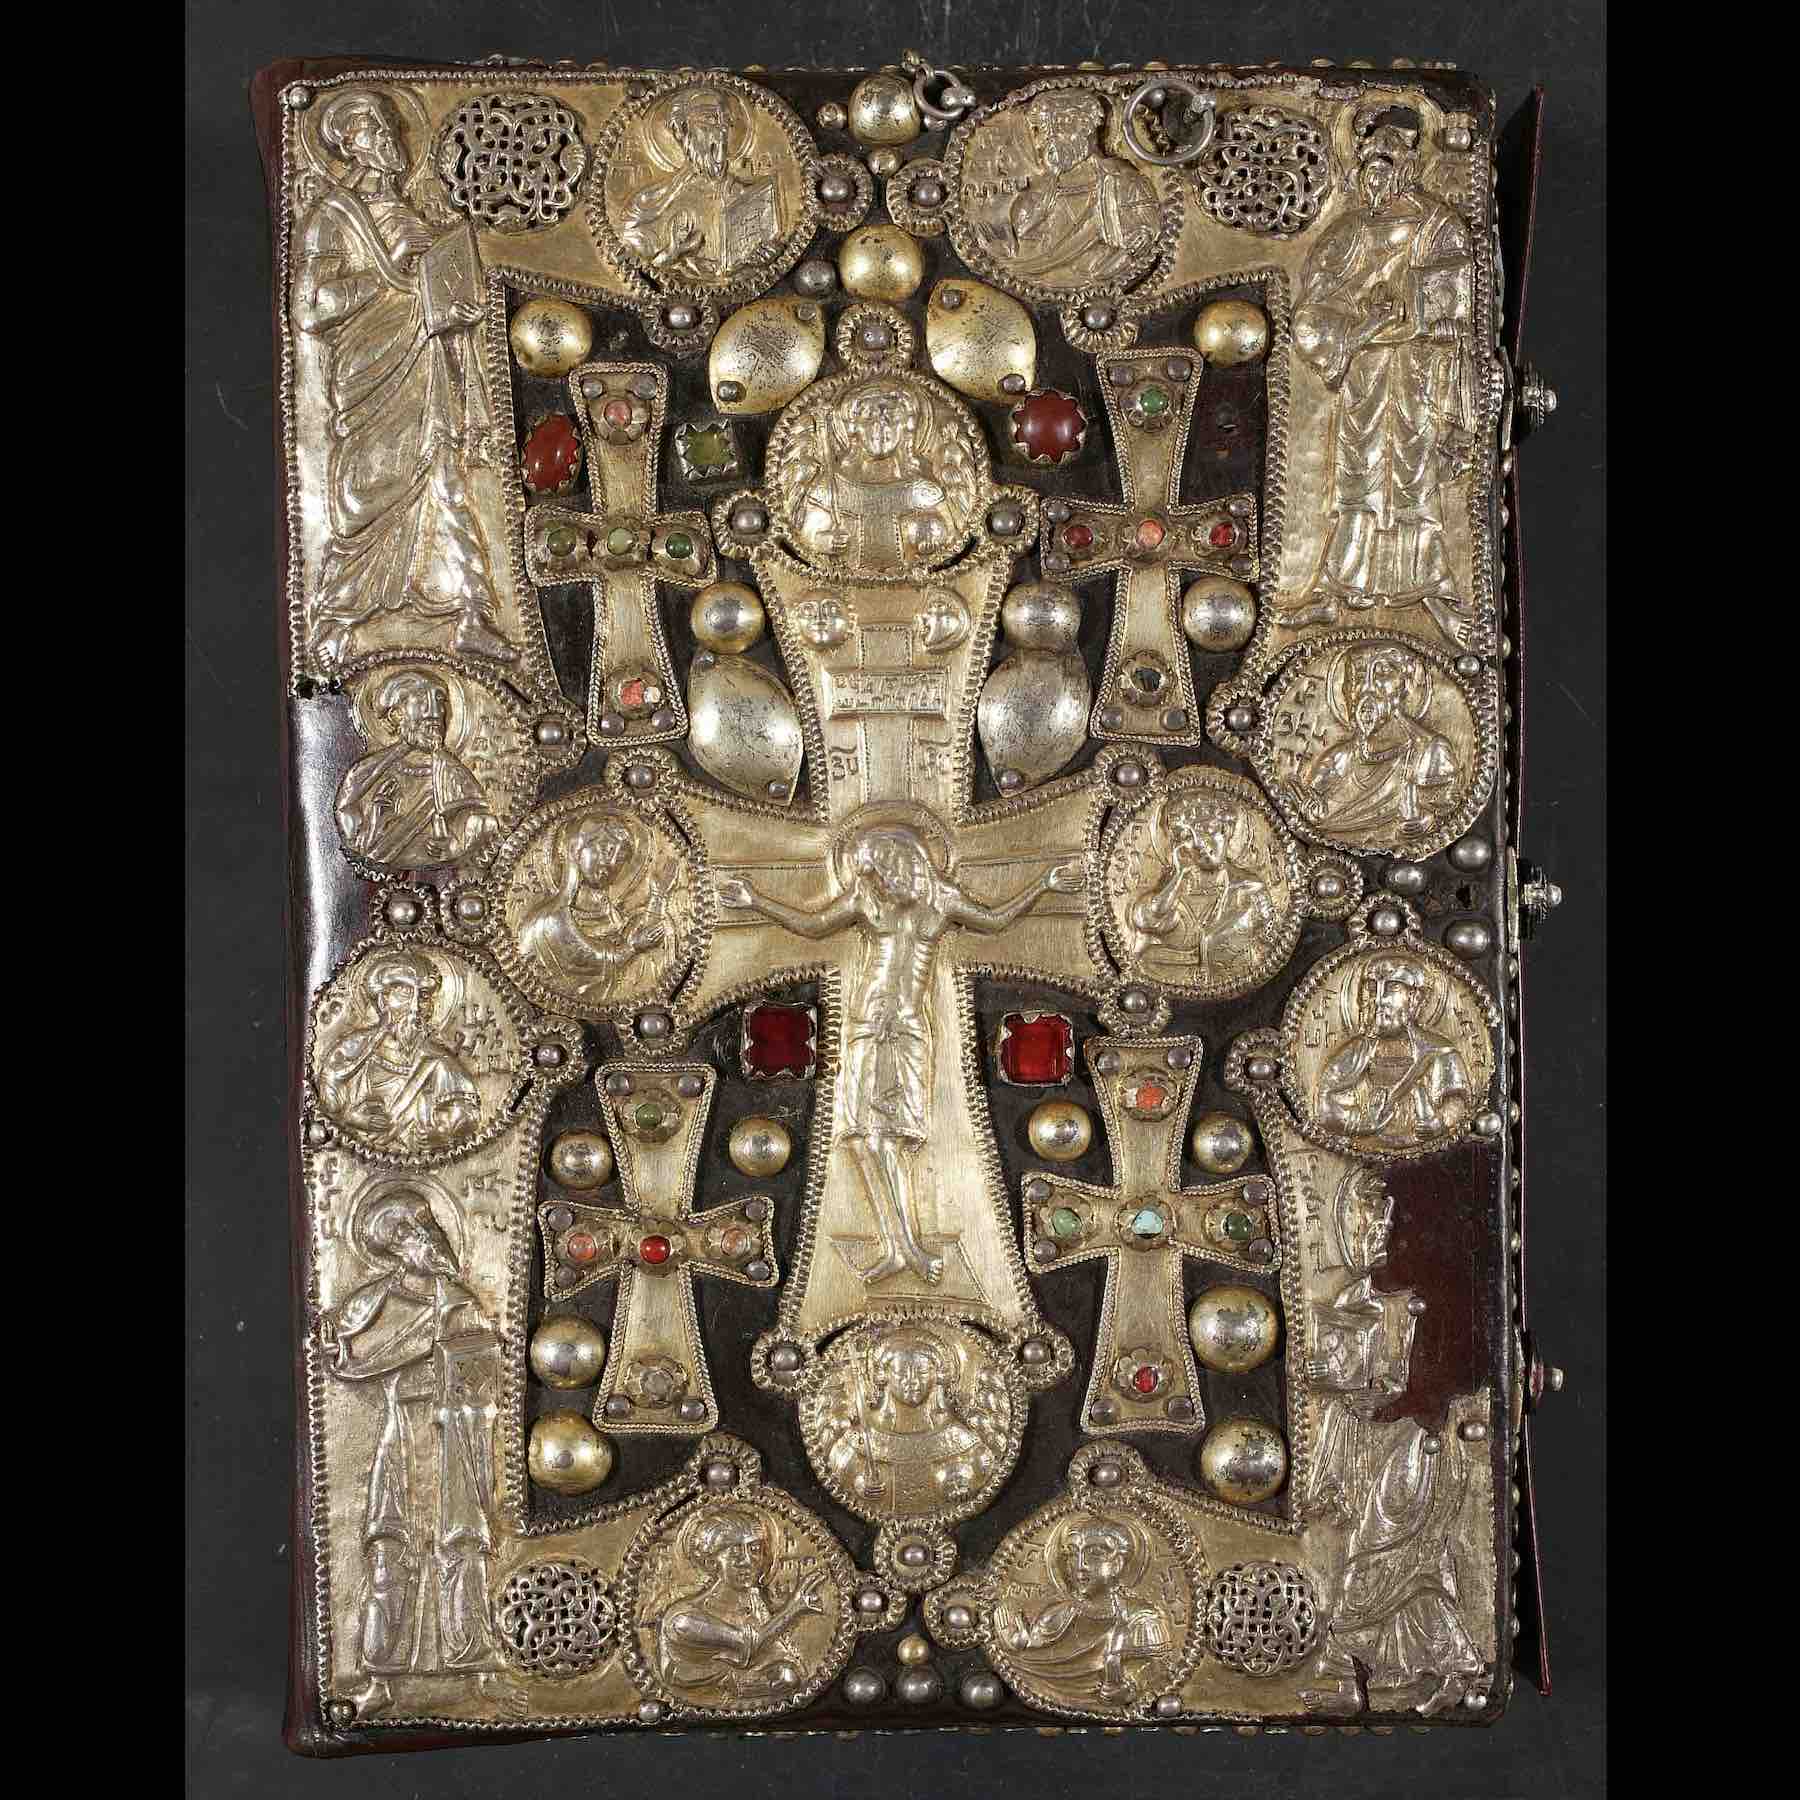 HMML’s Eastern Christian collections include a large number of Armenian manuscripts containing important texts and bookbindings, like this silver and jeweled cover of an Armenian gospel book located in Anṭilyās, Lebanon. (<a href='https://w3id.org/vhmml/readingRoom/view/510608'>ACC 8</a>)